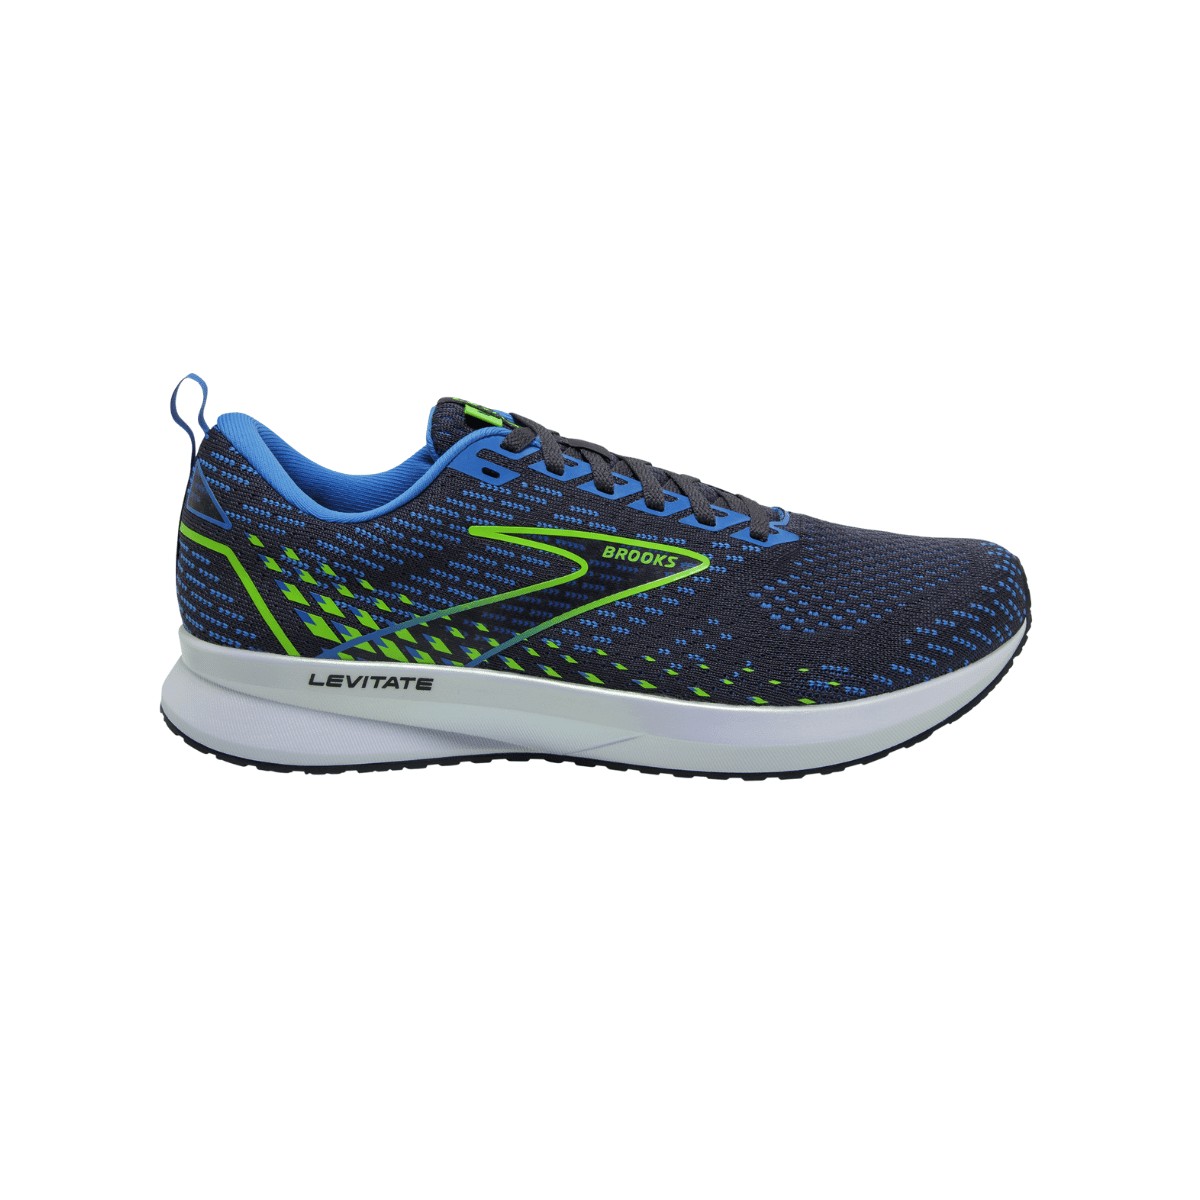 Brooks Levitate 5 Shoes Blue Green AW21, Size 42,5 - EUR